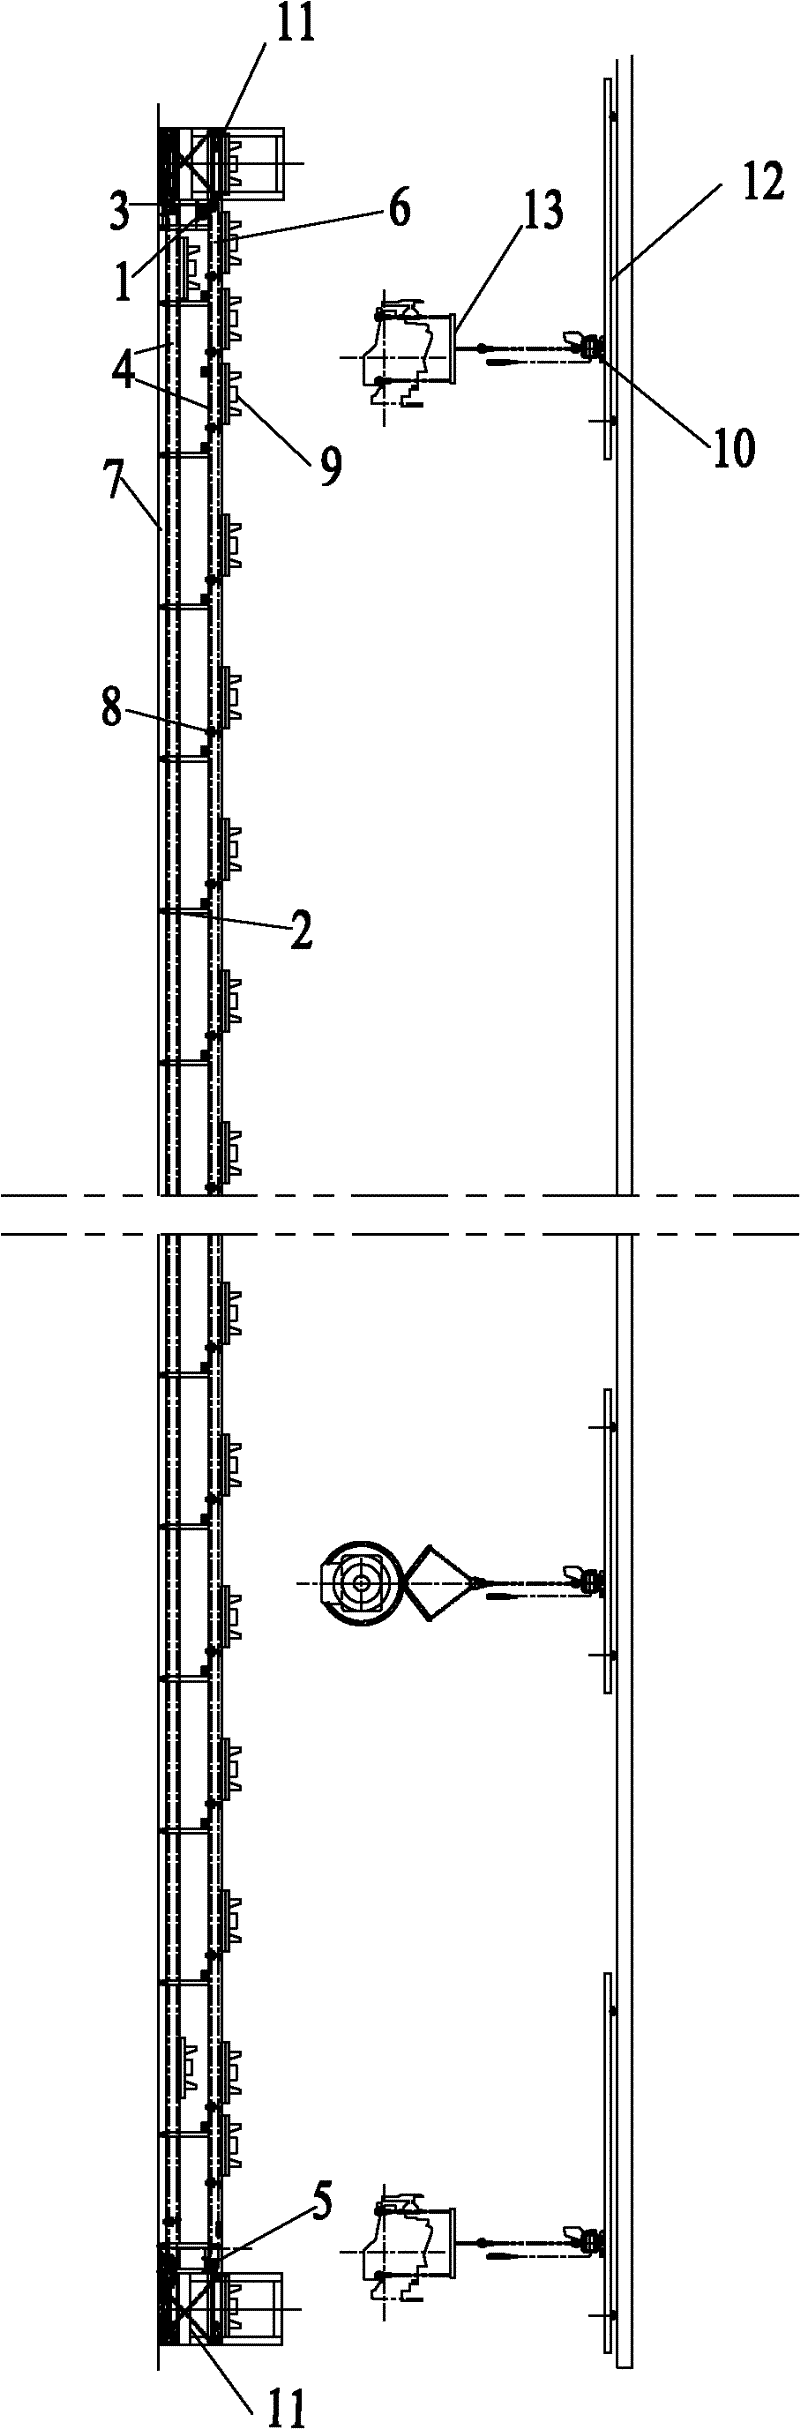 Engine dismounting conveyer system for scraped car dismounting line